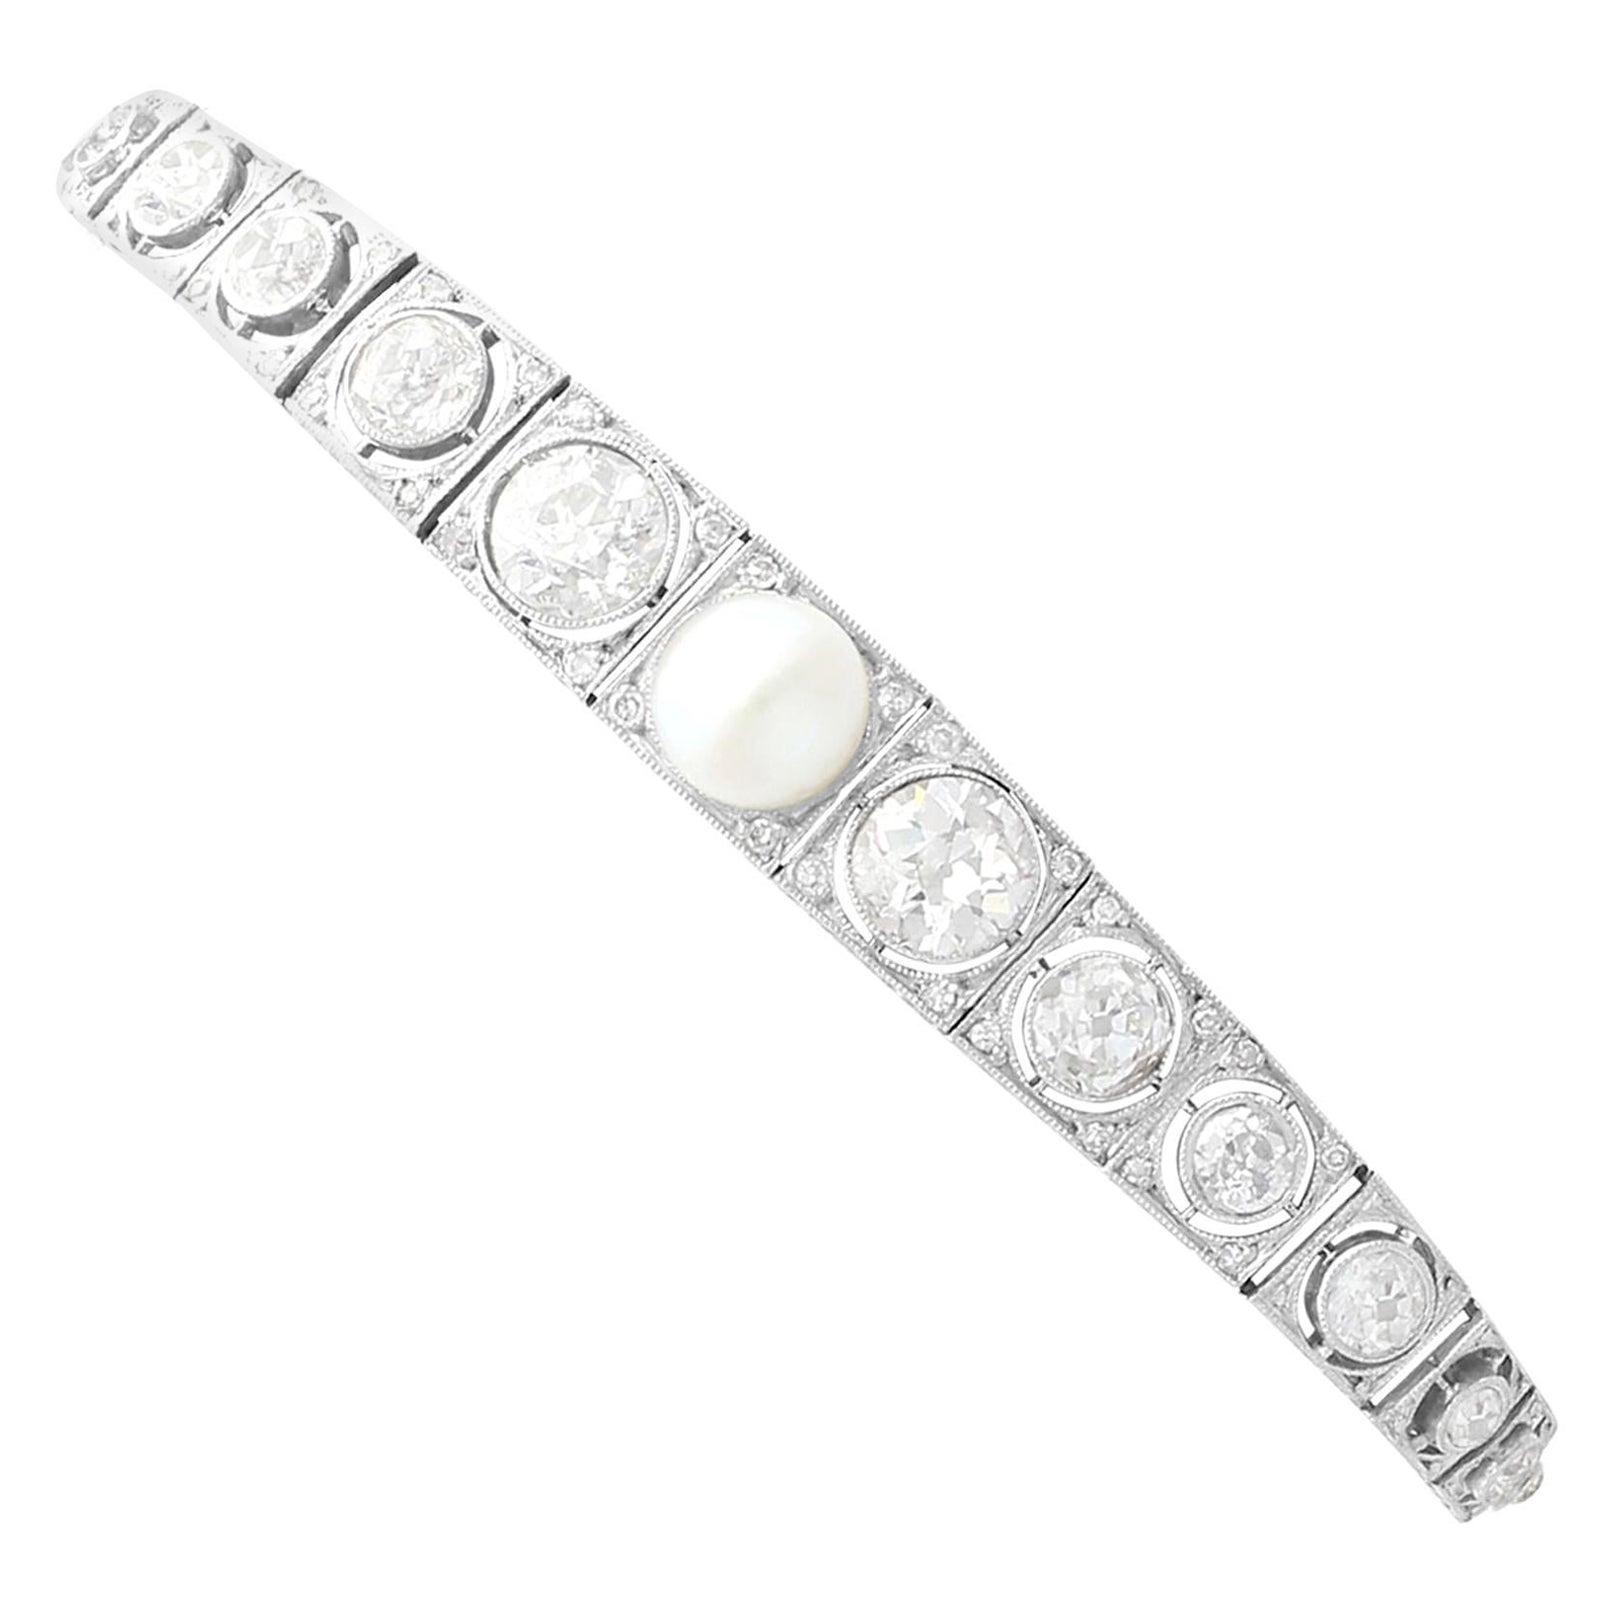 1900s Antique 5.61 Carat Diamond and Pearl White Gold Bracelet For Sale